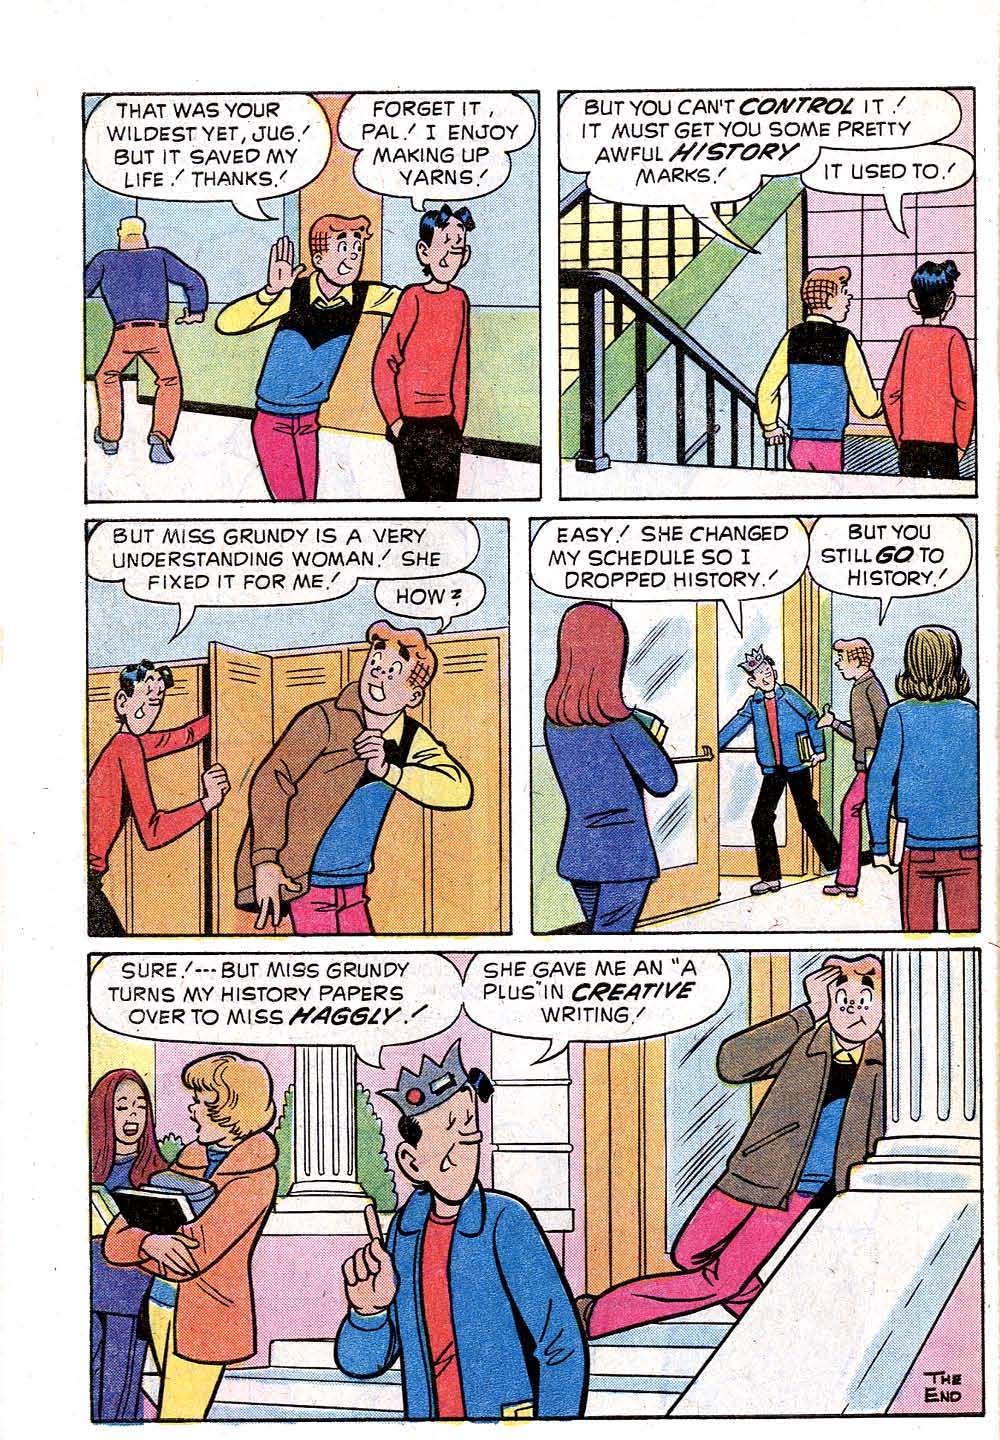 Archie (1960) 235 Page 32